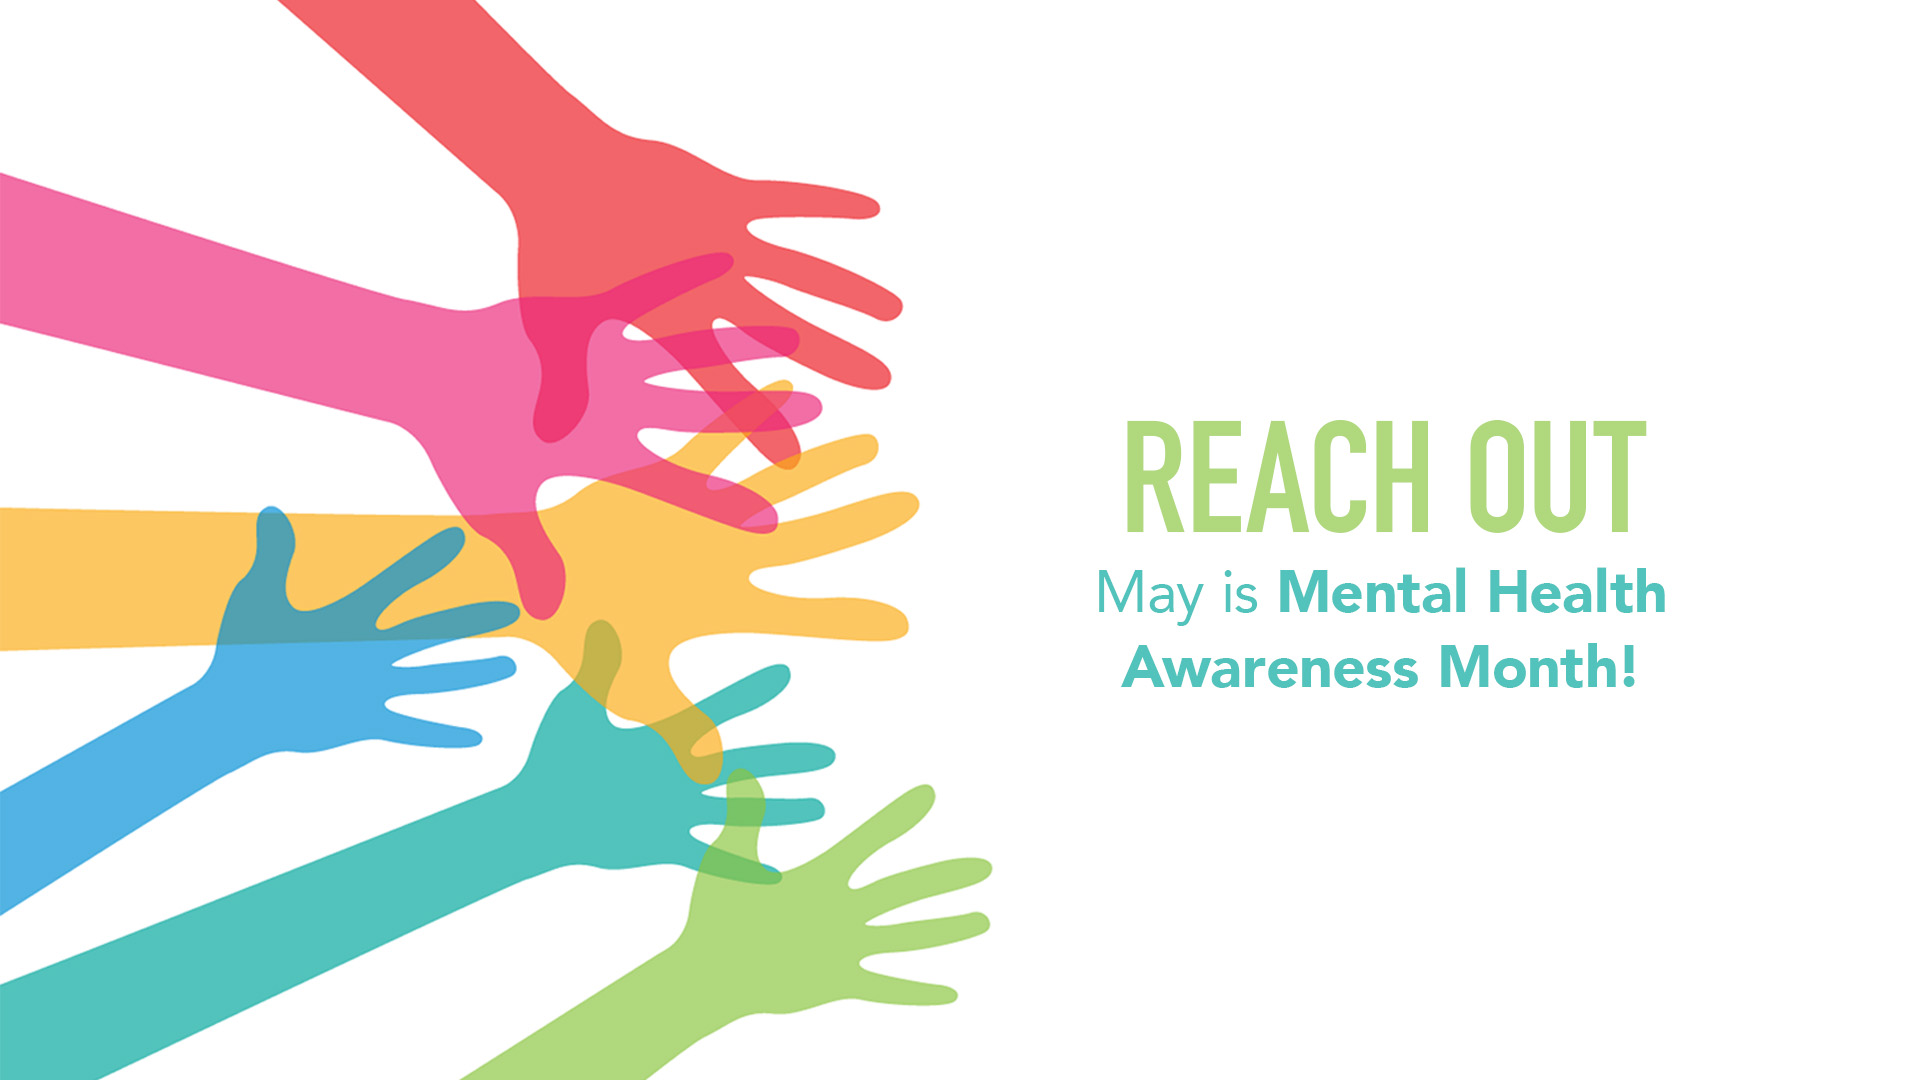 White background with silhouettes of different vibrant colored hands reaching out from the left of the image. on the right side of the image it reads Reach Out in green text and May is Mental Health Awareness Month is typed out in a teal font